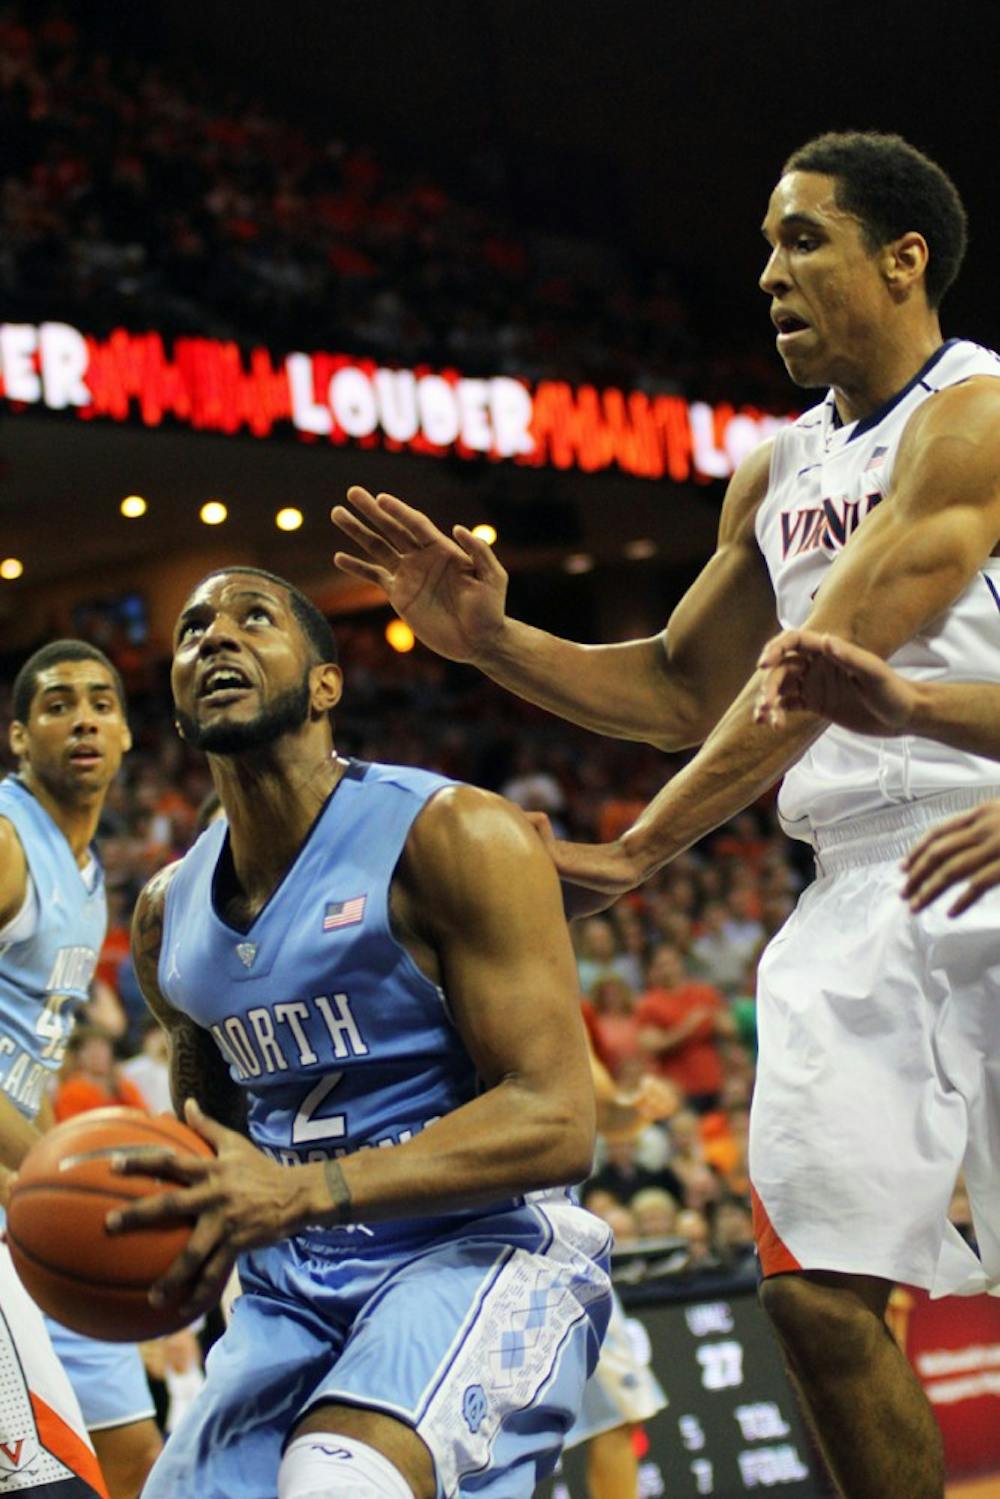 	<p>The Tar Heels were defeated by Virginia 76-61 Monday January 20 in Charlottesville, VA.</p>